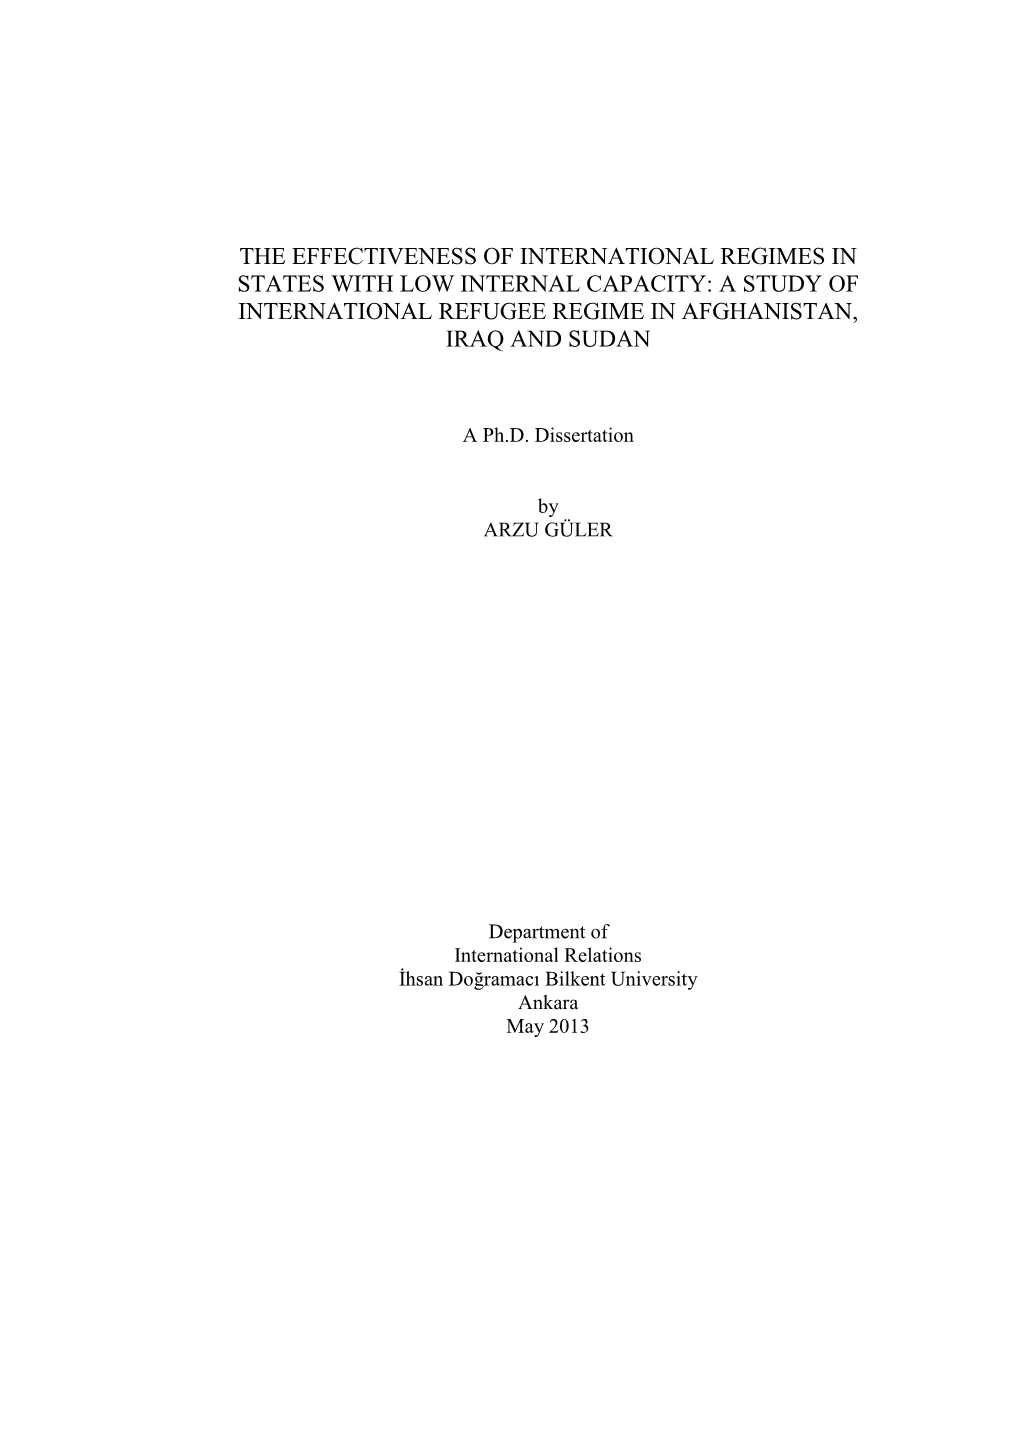 A Study of International Refugee Regime in Afghanistan, Iraq and Sudan